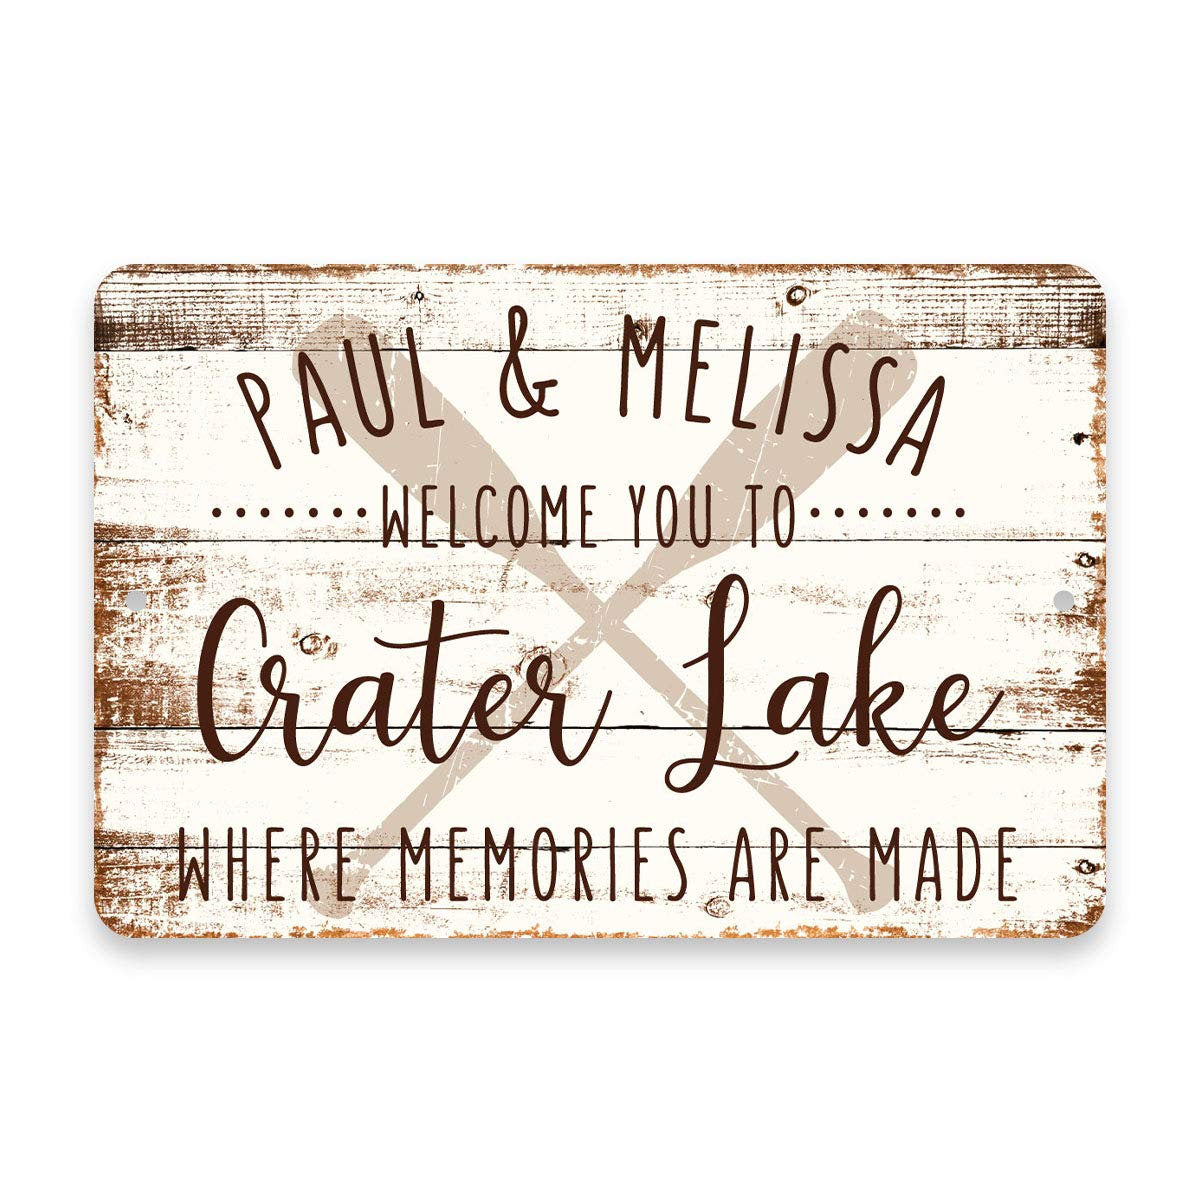 Personalized Welcome to Crater Lake Where Memories are Made Sign - 8 X 12 Metal Sign with Wood Look